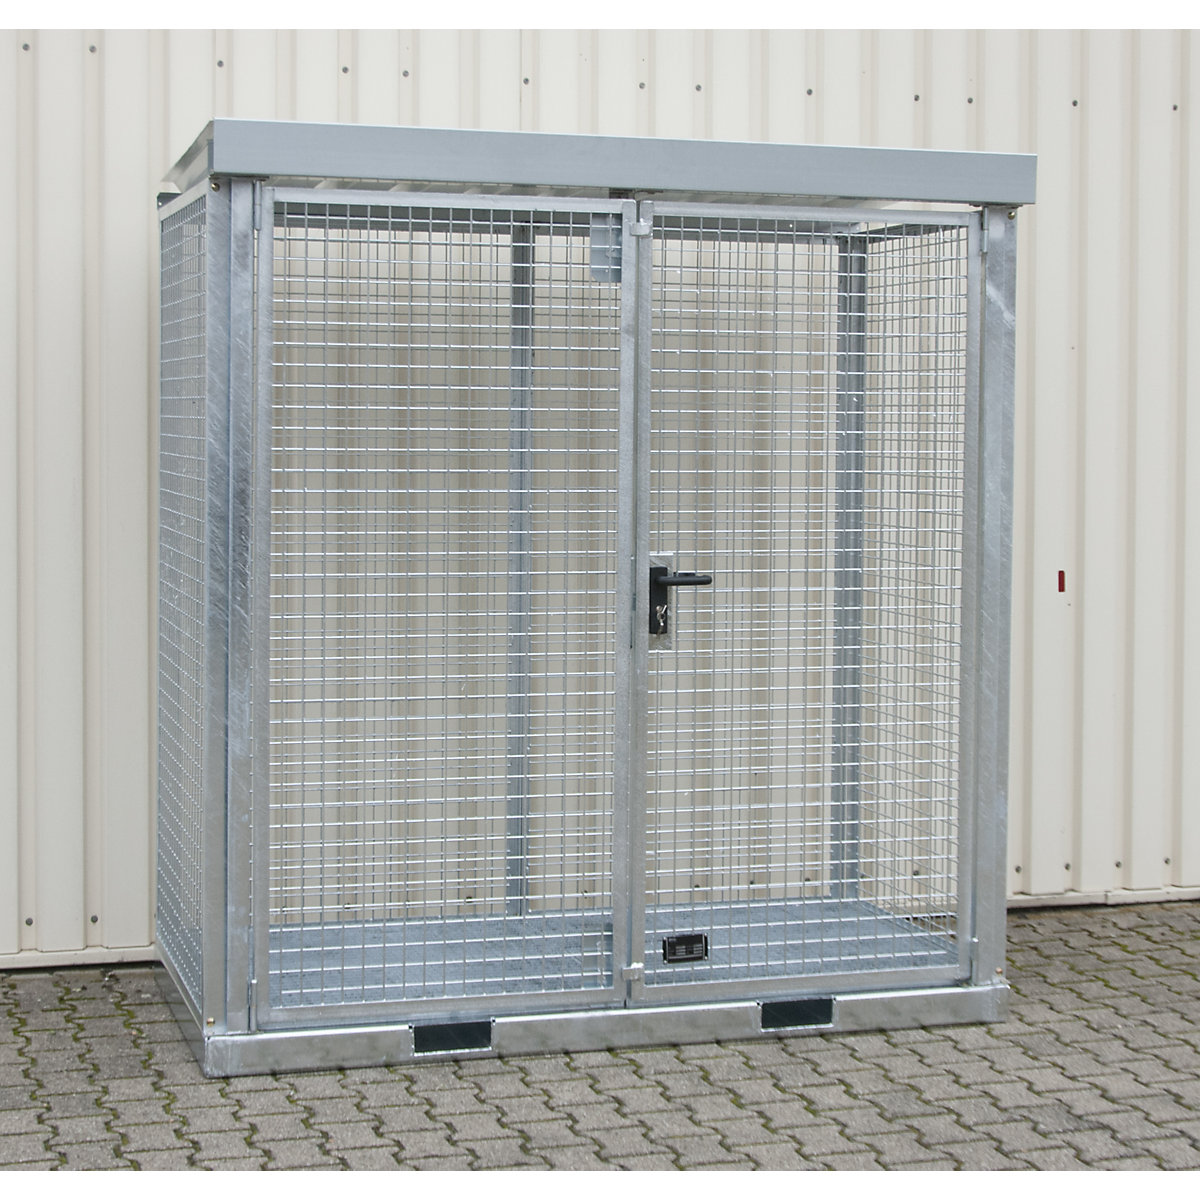 Assembled mesh gas cylinder cages – eurokraft pro, 32 cylinders with Ø 220 mm, grate floor-5